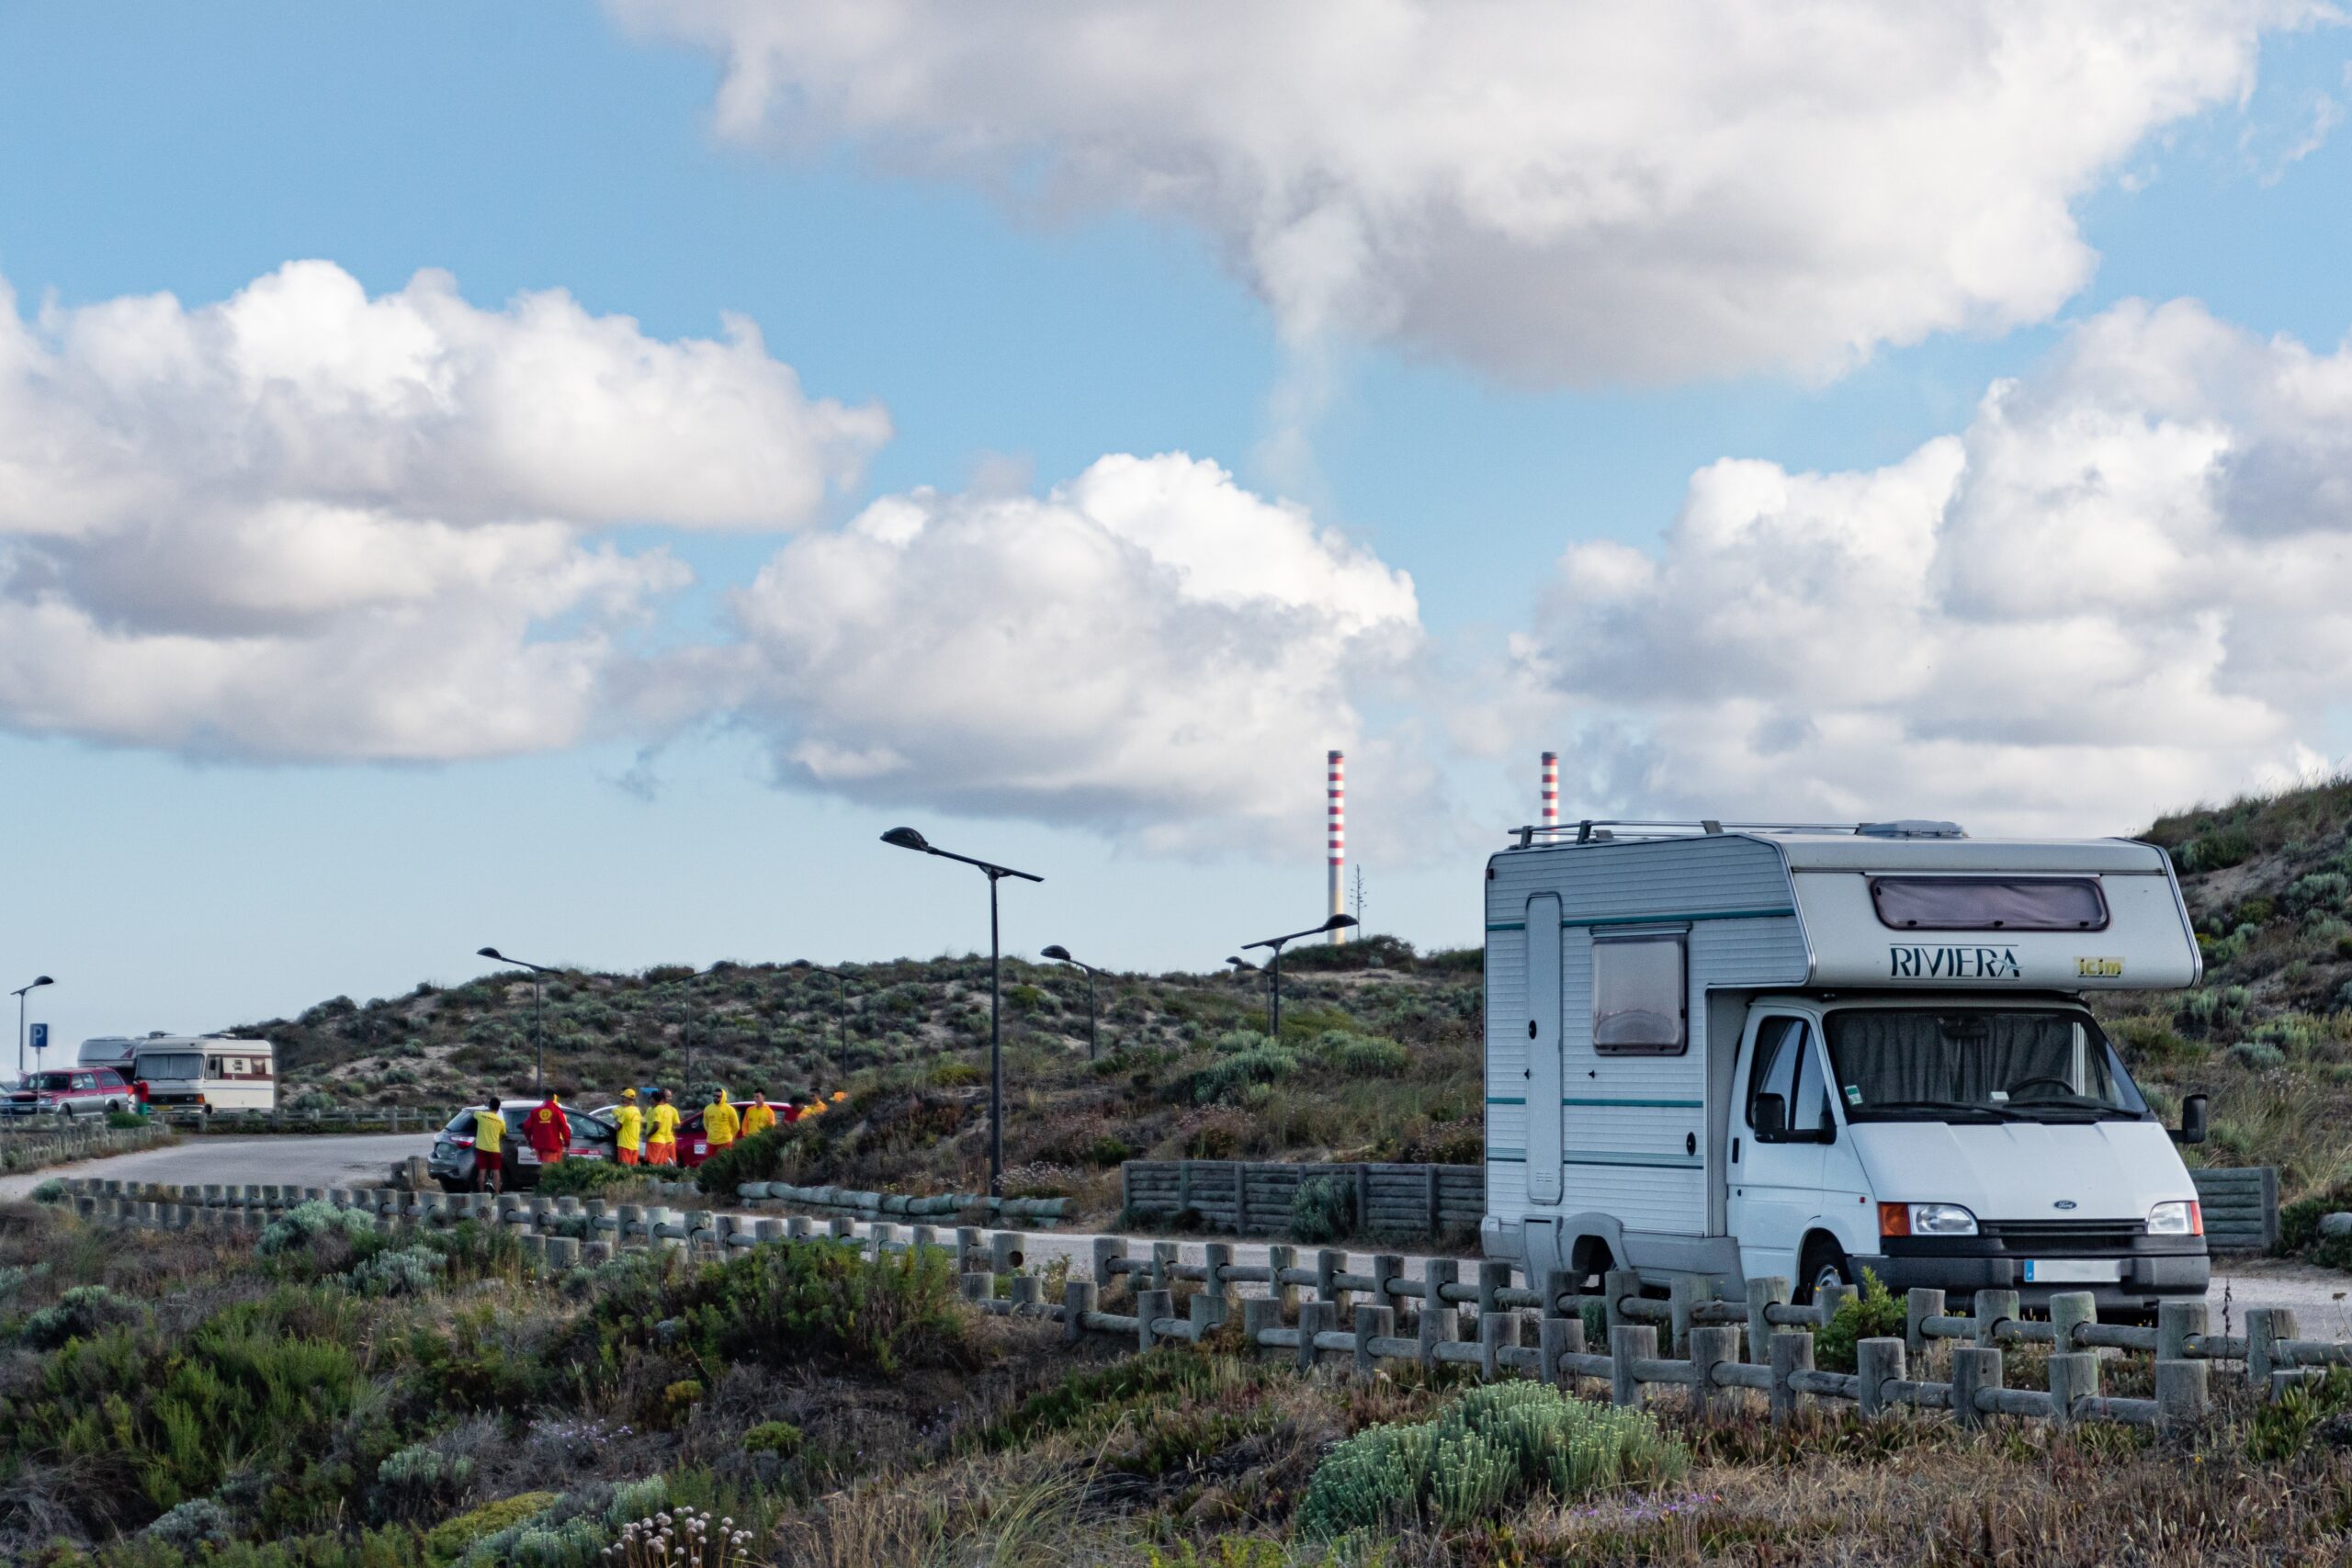 The Top 5 Benefits of RV Travel